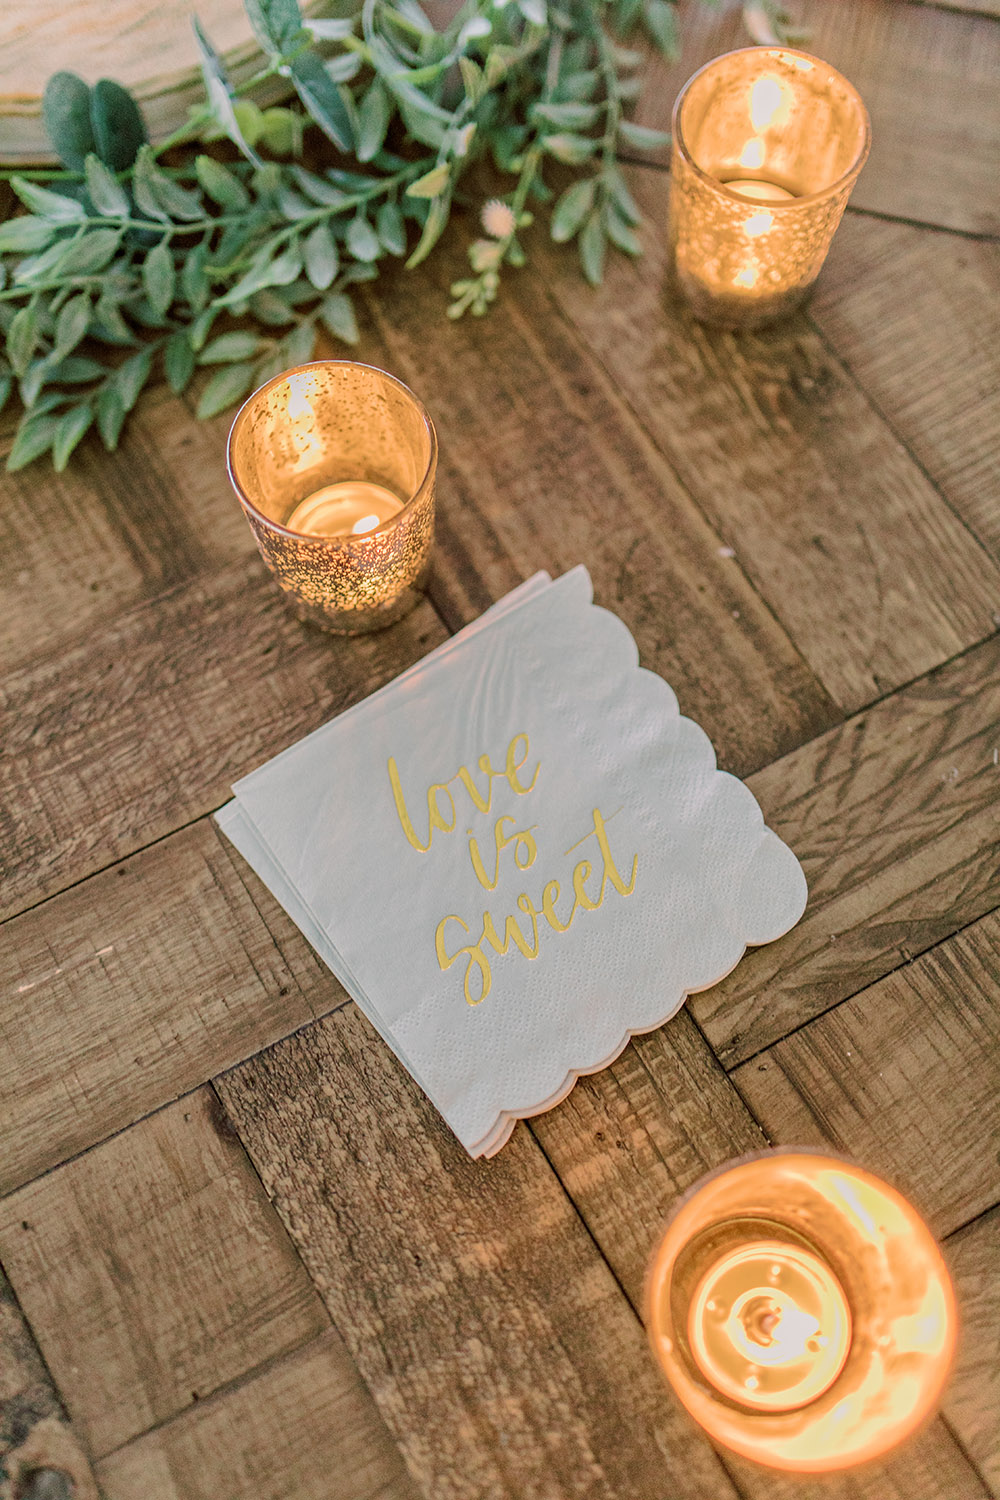 Cocktail napkins embossed with "Love is Sweet". Photo: Ashley Kristen Photography